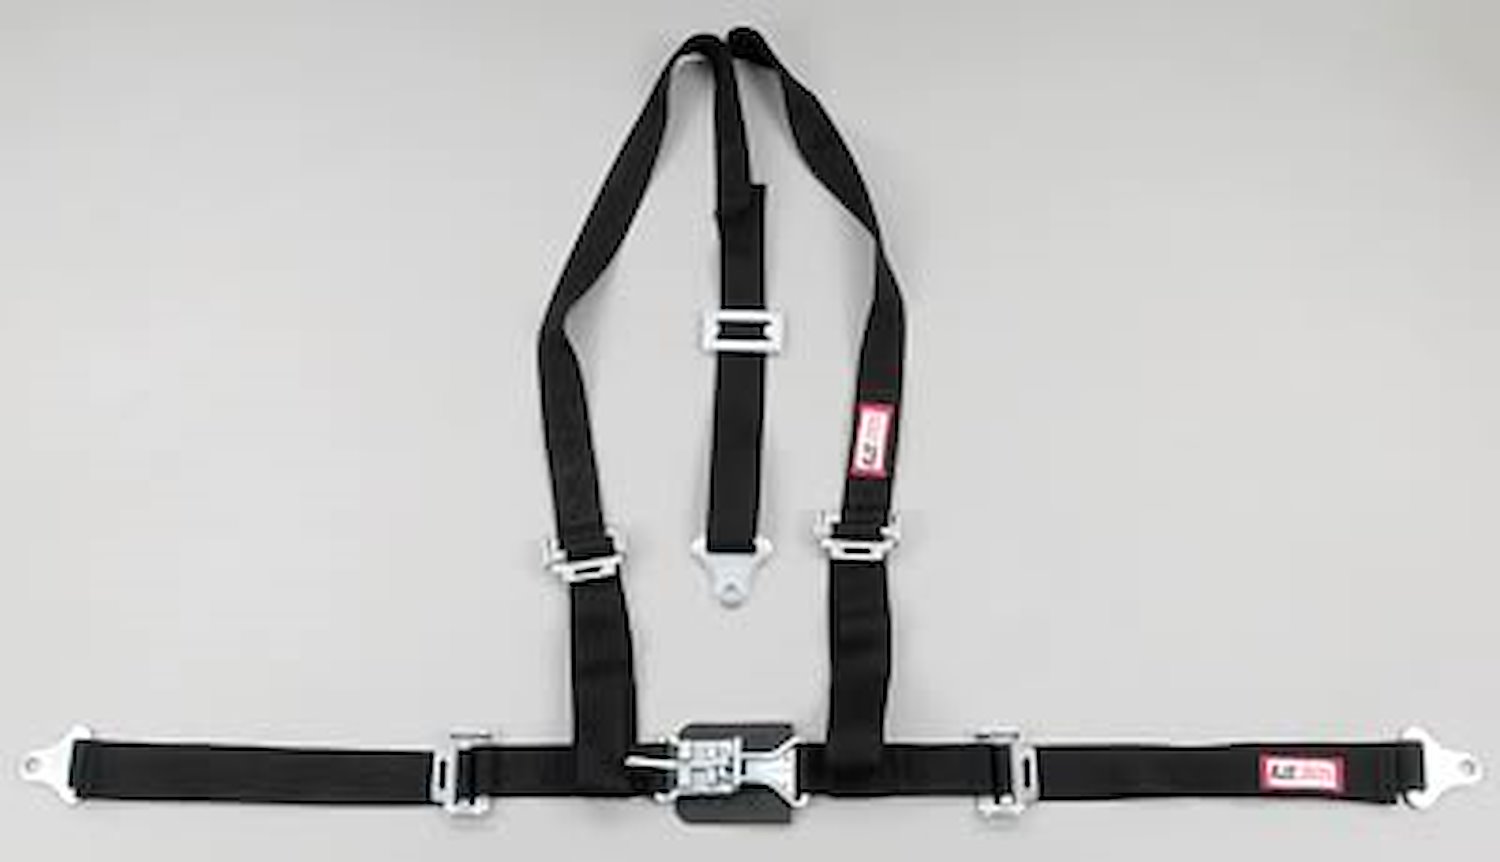 NON-SFI L&L HARNESS 3 PULL DOWN Lap Belt SEWN IN 2 Shoulder Harness V ROLL BAR Mount w/STERNUM STRAP ALL WRAP ENDS RED